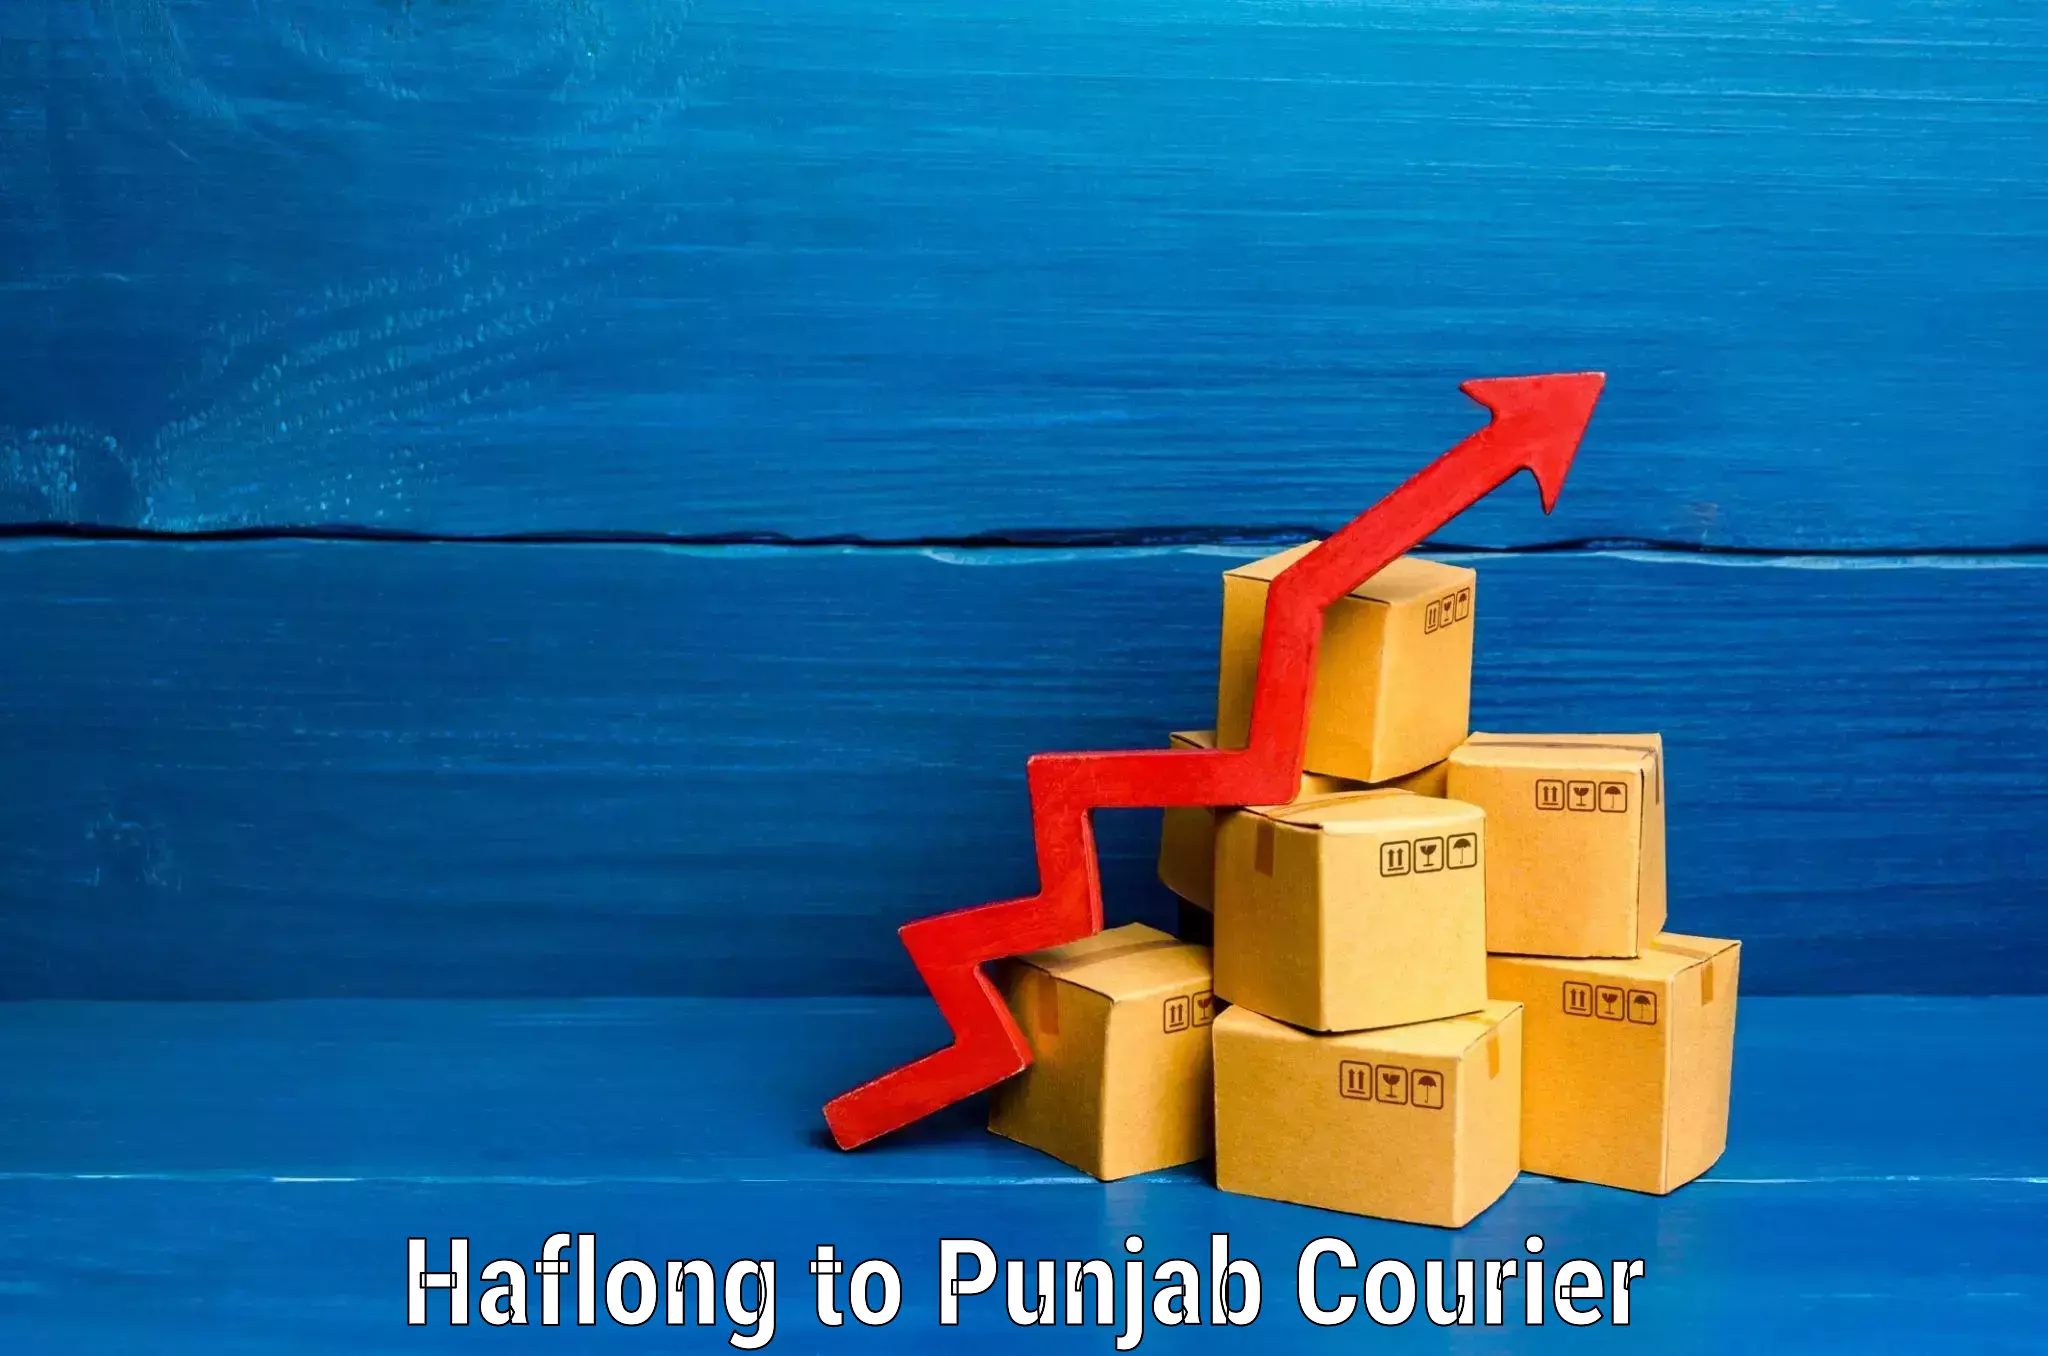 Doorstep luggage collection in Haflong to Punjab